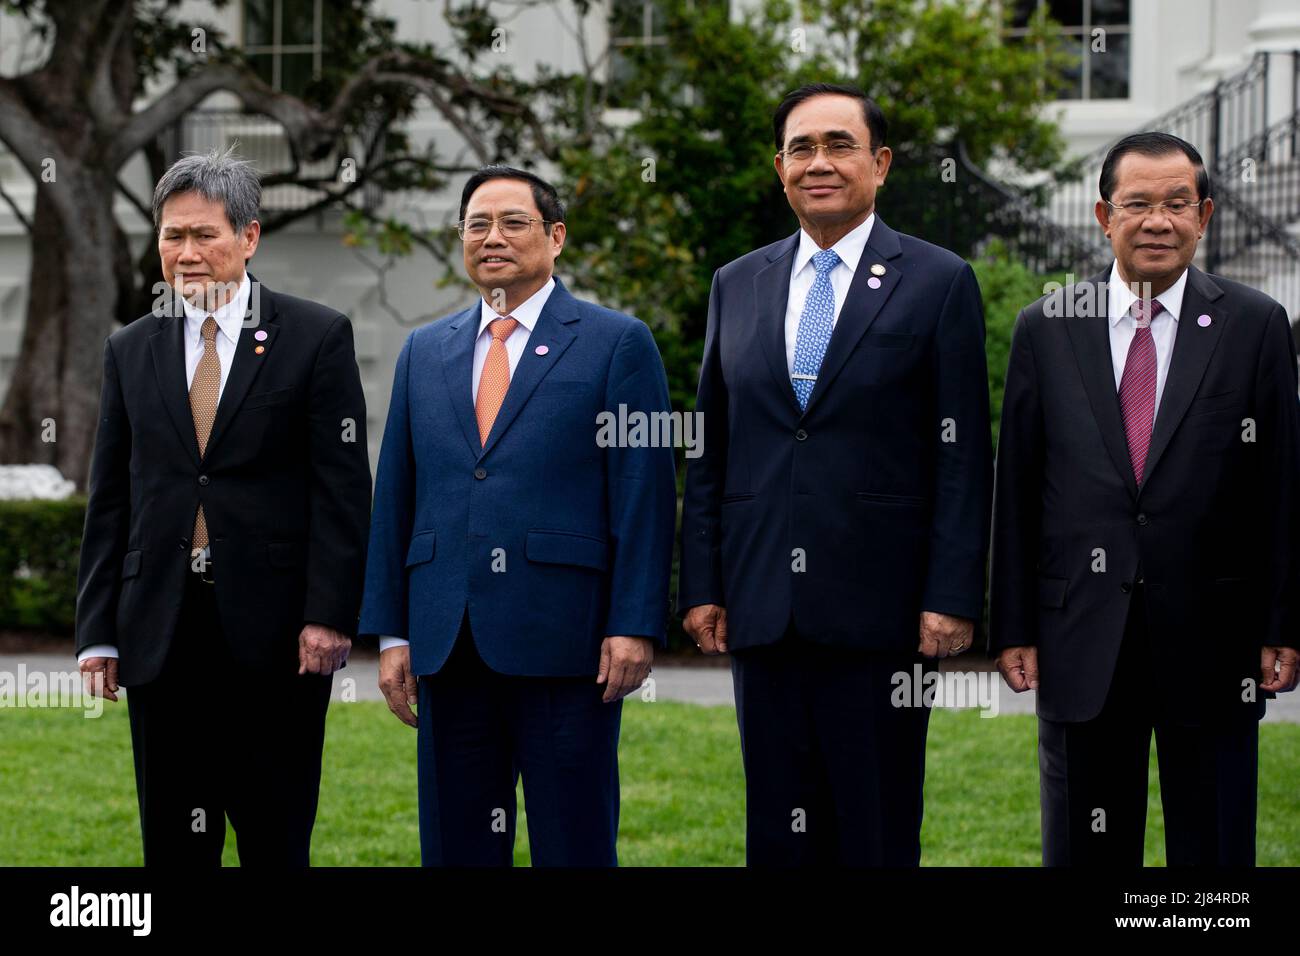 (L to R); Dato Lim Jock Hoi, Secretary-General of the Association for Southeast Asian Nations; Prime Minister of Vietnam Pham Minh Chinh; Prime Minister of Thailand Prayut Chan-o-cha; and Prime Minister of Cambodia Hun Sen; pose with leaders of the US-ASEAN Special Summit during a family photo on the South Lawn of the White House in Washington, DC, USA, 12 March 2022. US President Joe Biden welcomed leaders of ASEAN countries and the ASEAN Secretary General to the White House as the US-ASEAN Special Summit convenes, the second Special Summit since 2016. The summit is expected to address the CO Stock Photo